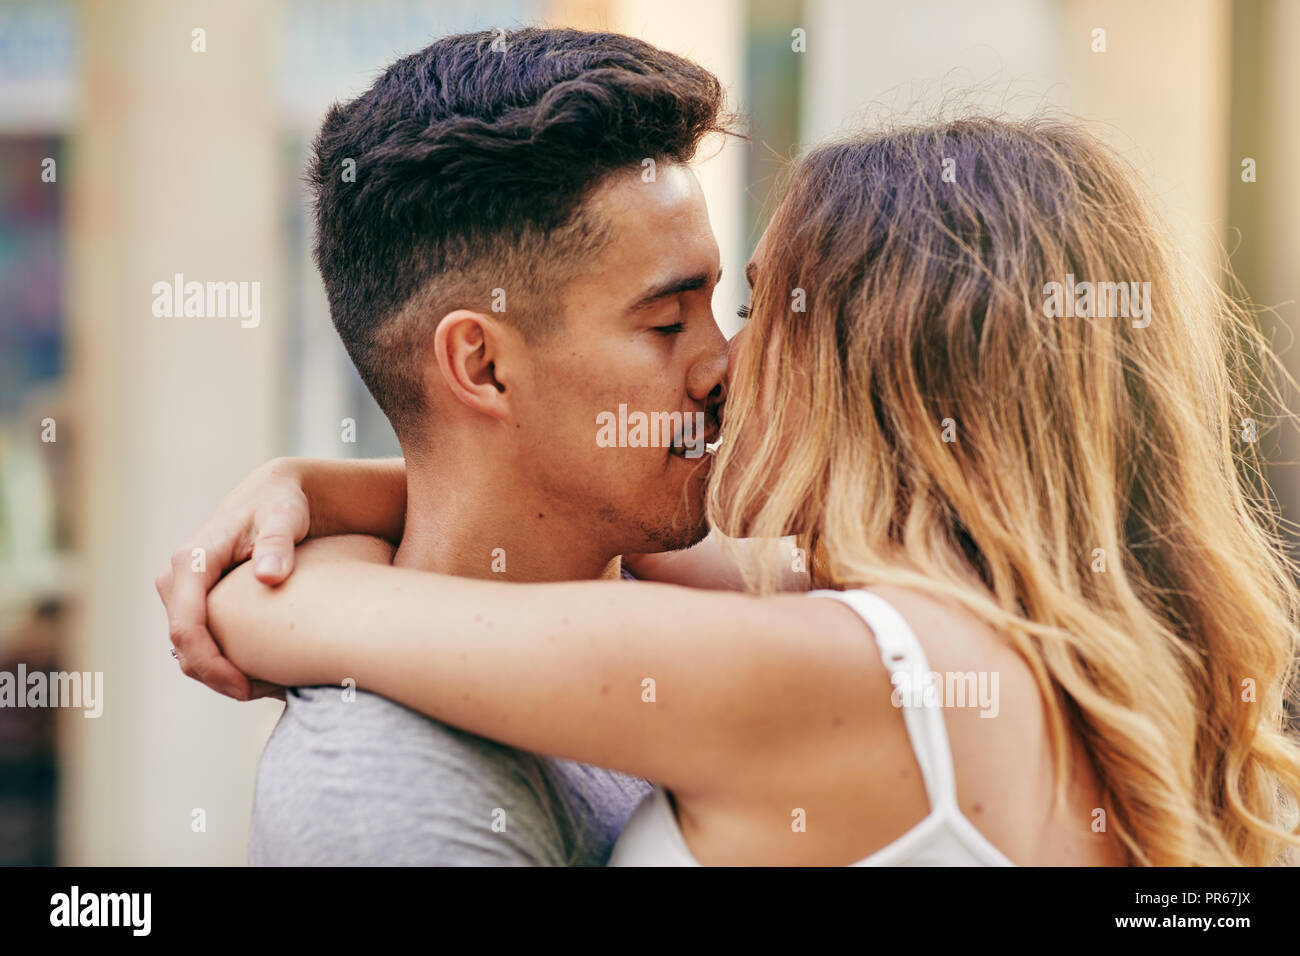 Affectionate young couple sharing a romantic kiss while standing in each other's arms on a street in the city Stock Photo